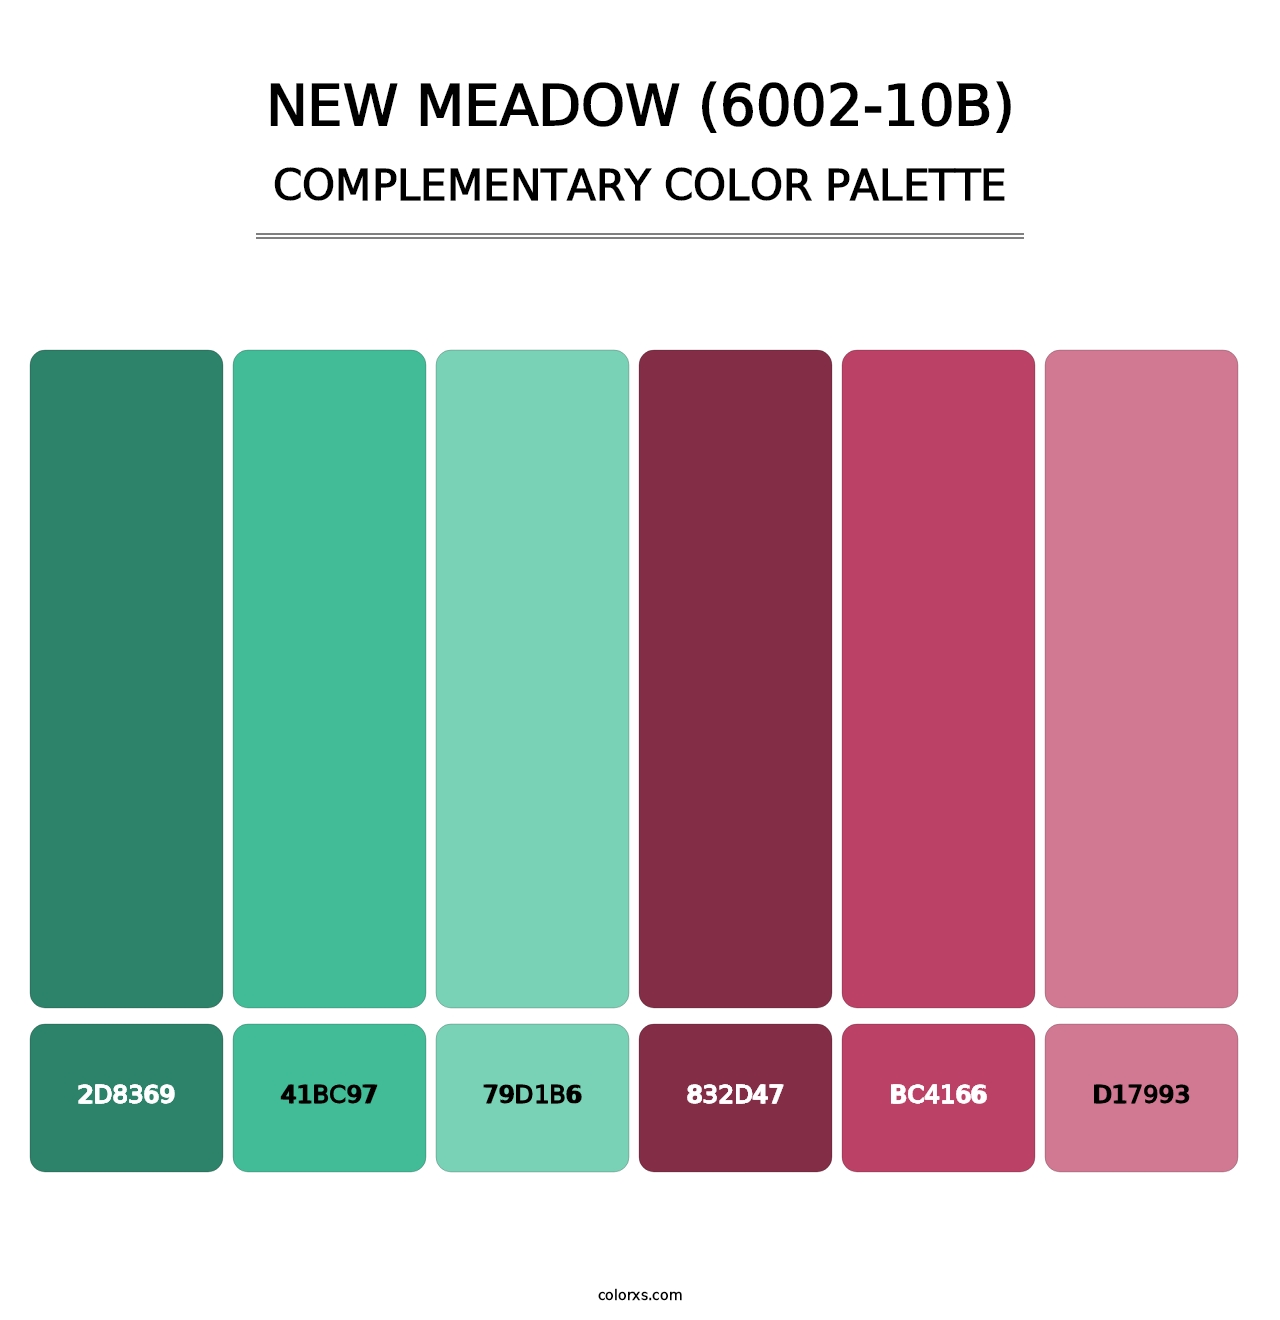 New Meadow (6002-10B) - Complementary Color Palette